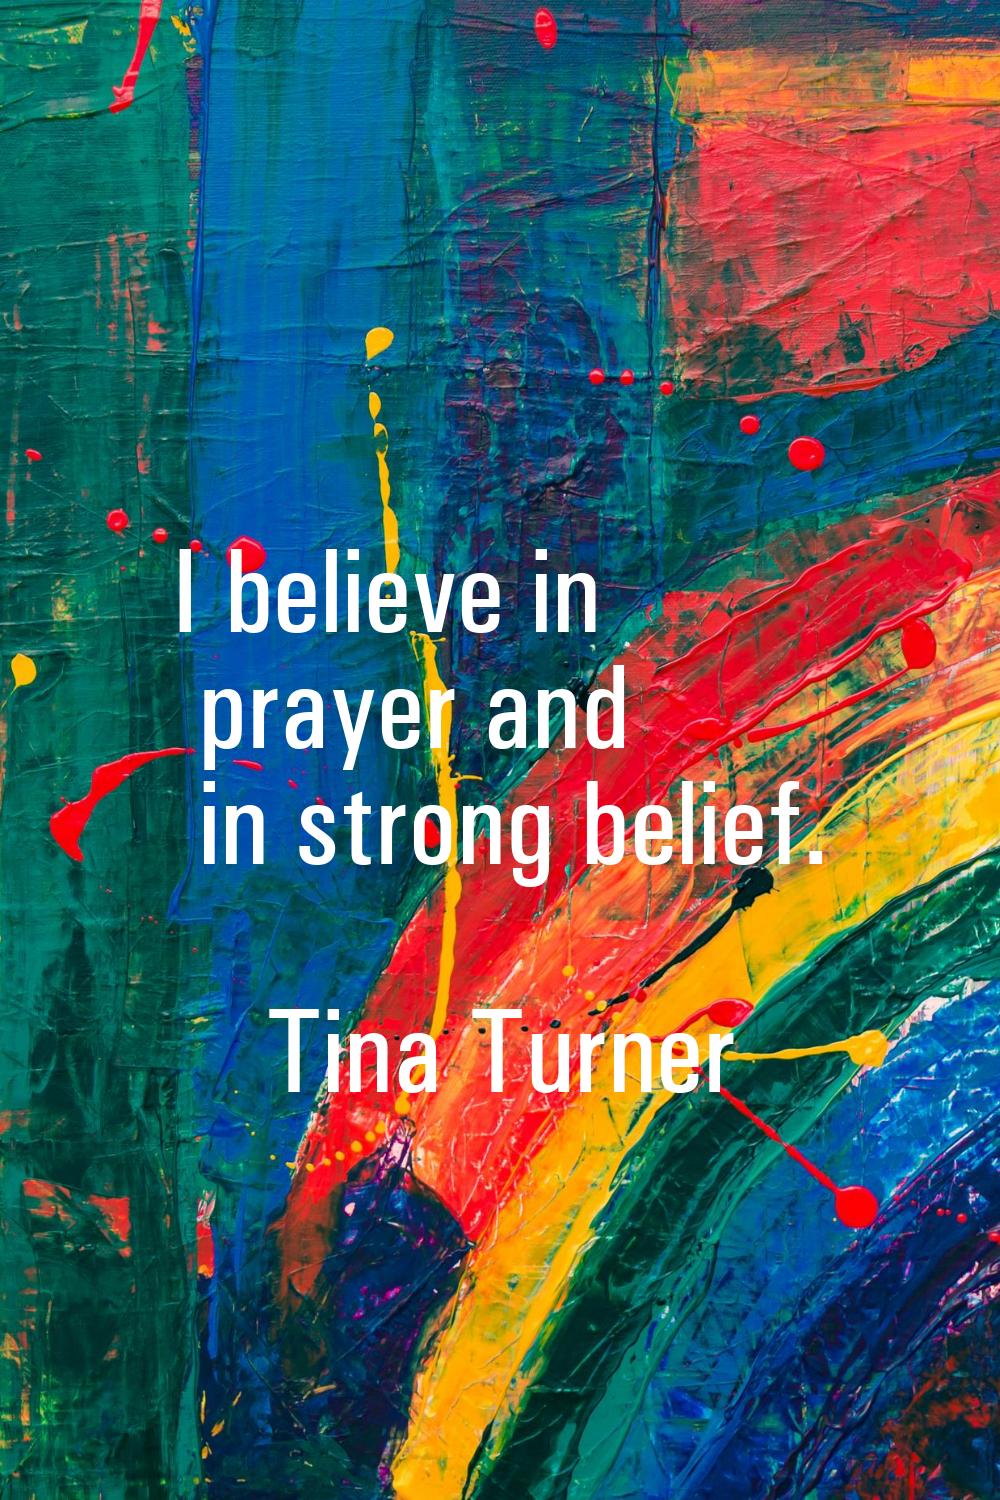 I believe in prayer and in strong belief.